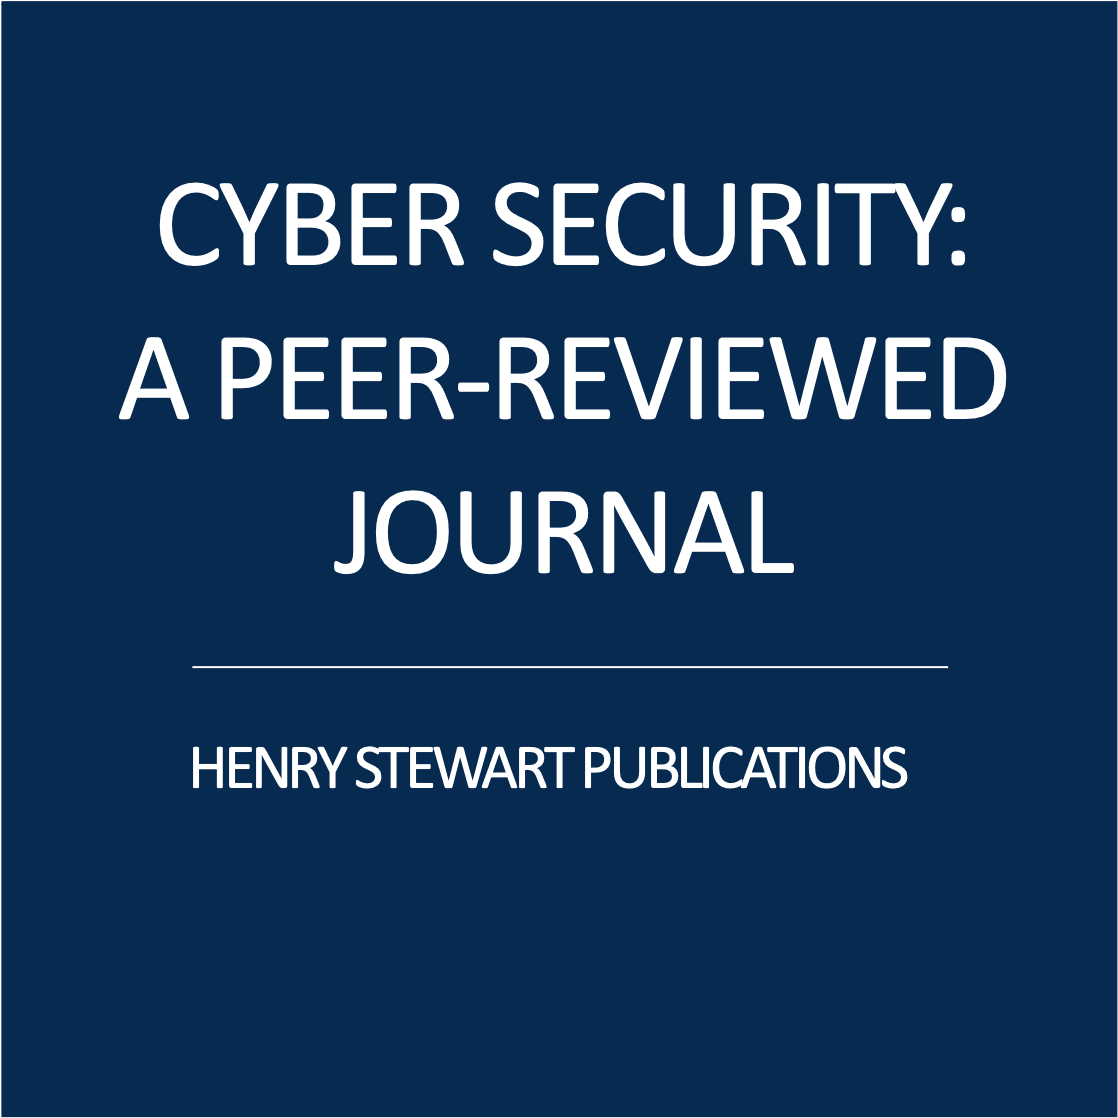 Cyber Security: A Peer-Reviewed Journal by Henry Stewart Publications